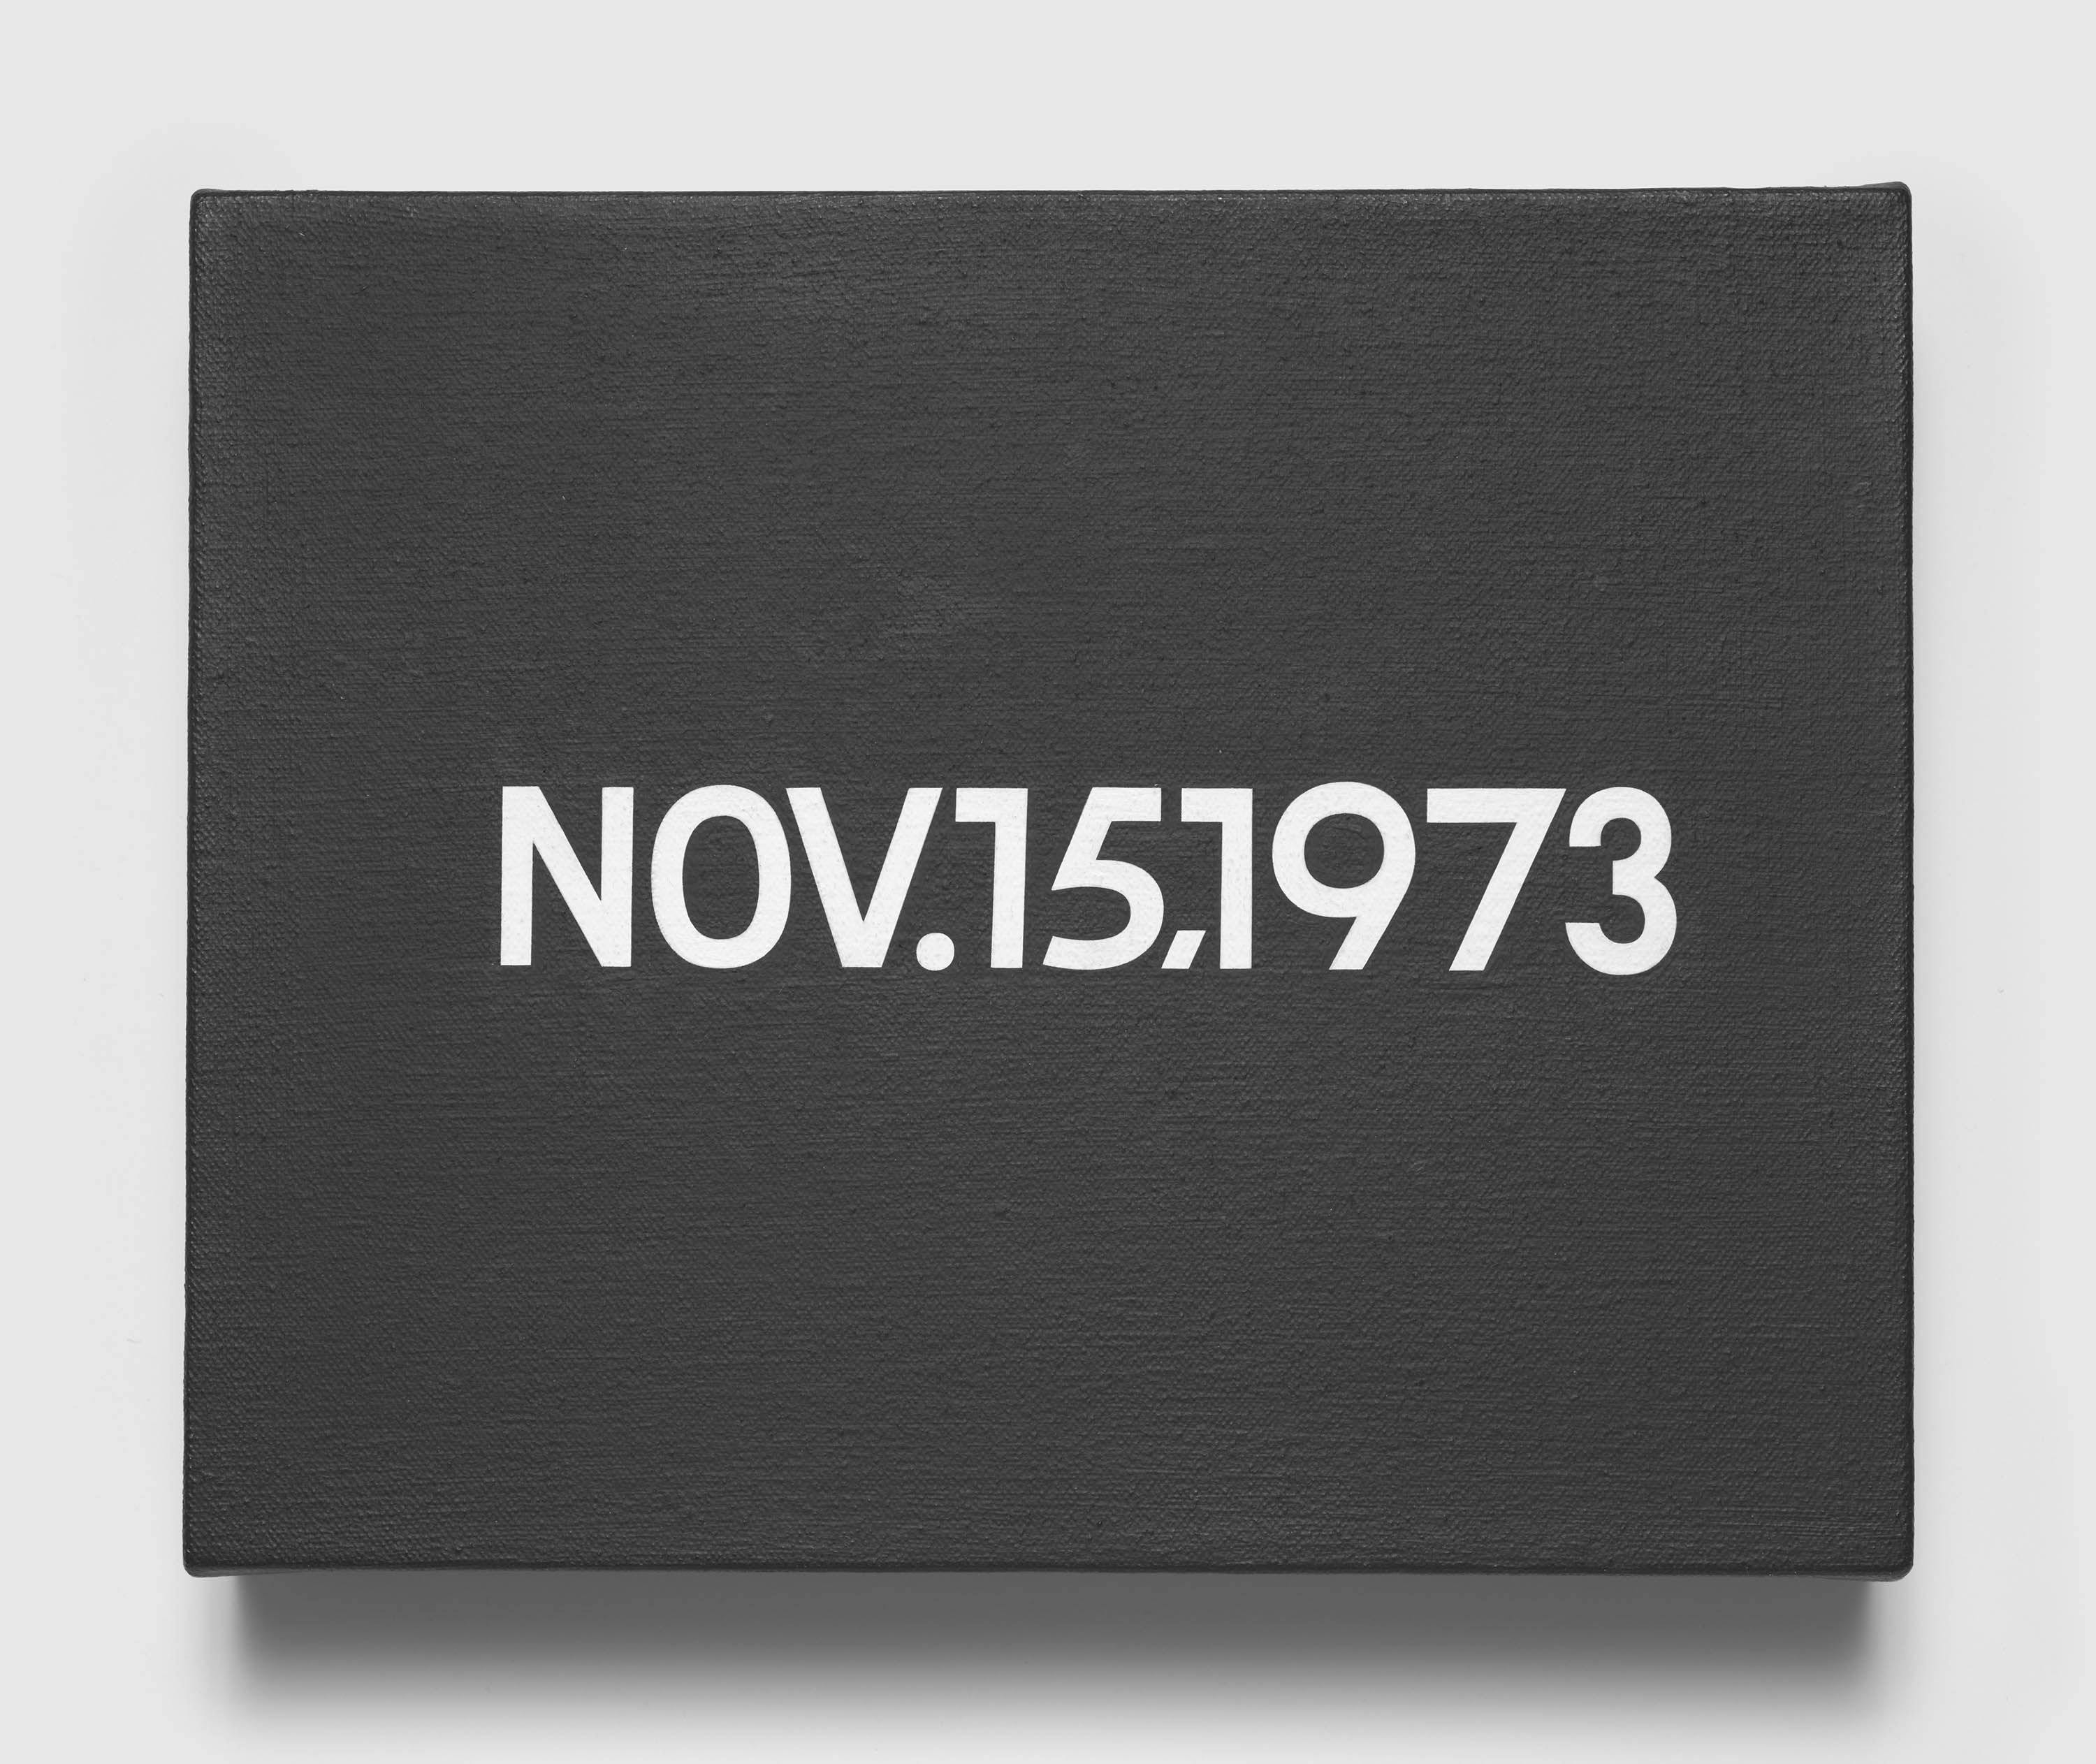 A painting by On Kawara NOV. 15, 1973, 1973 from "Today" series, 1966-2013 "Thursday.", dated 1966 to 2013.